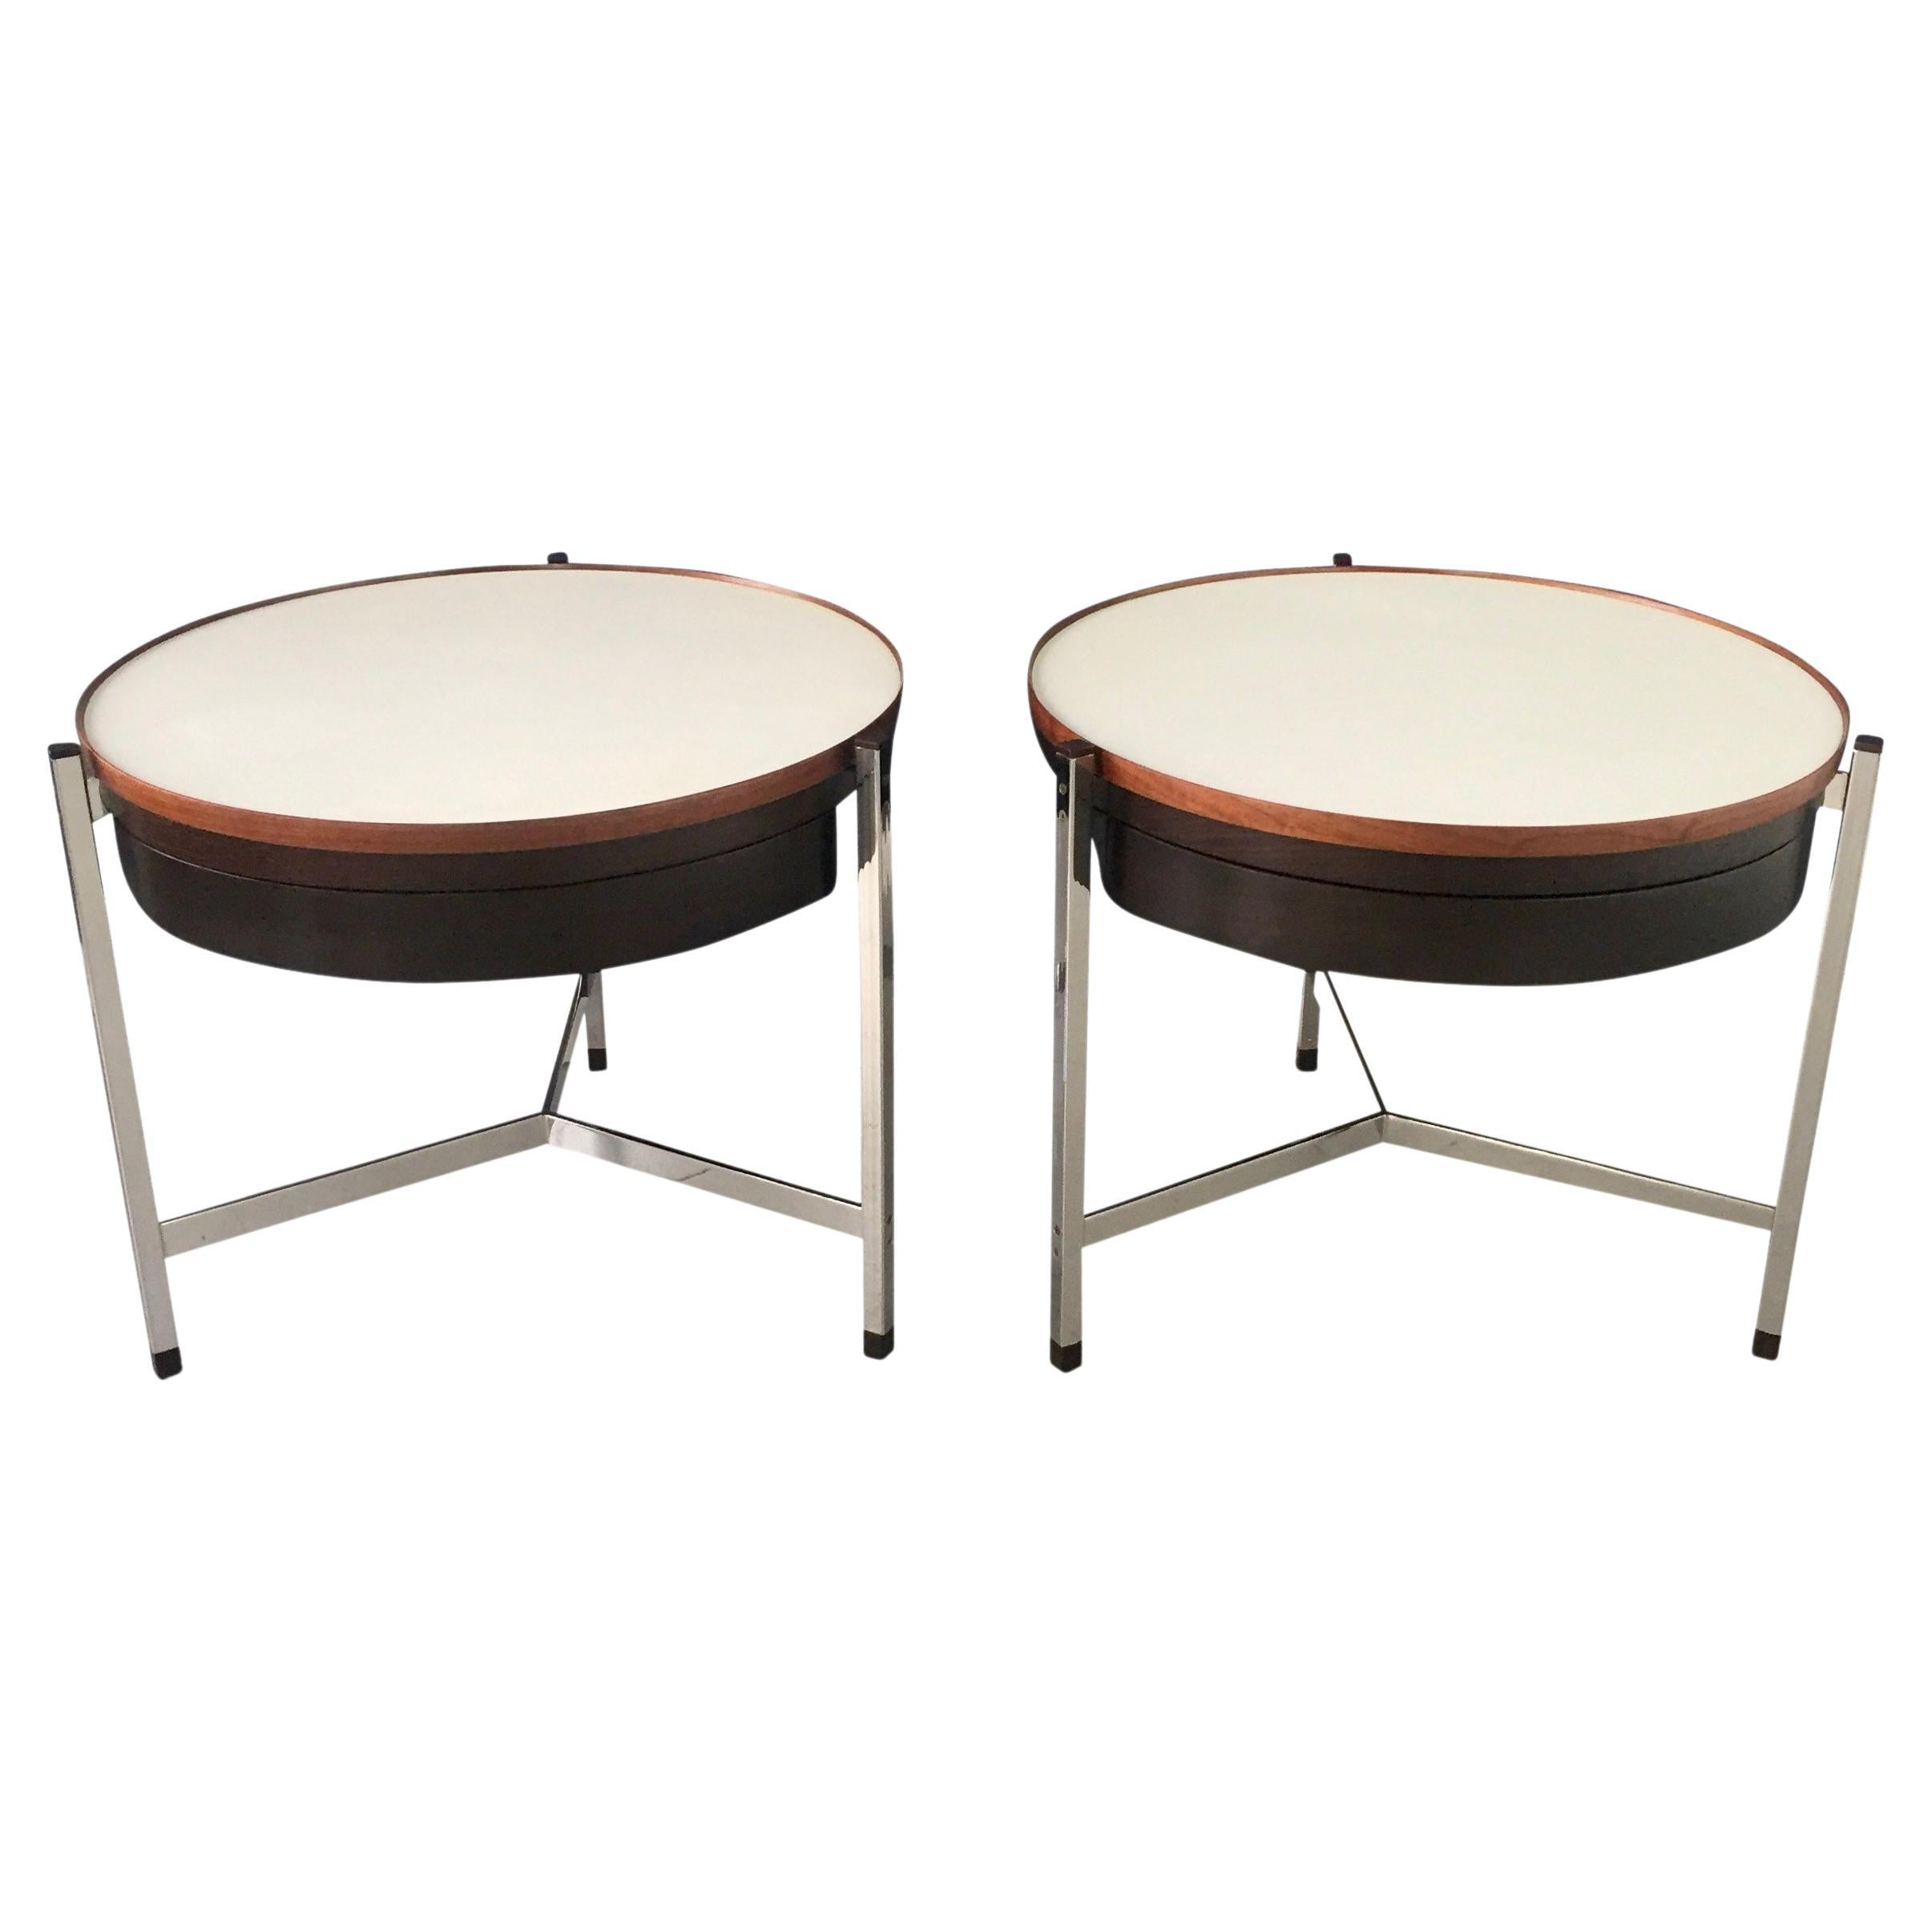 Dunbar Round Occasional Tables by Edward Wormley in Stainless Steel Midcentury